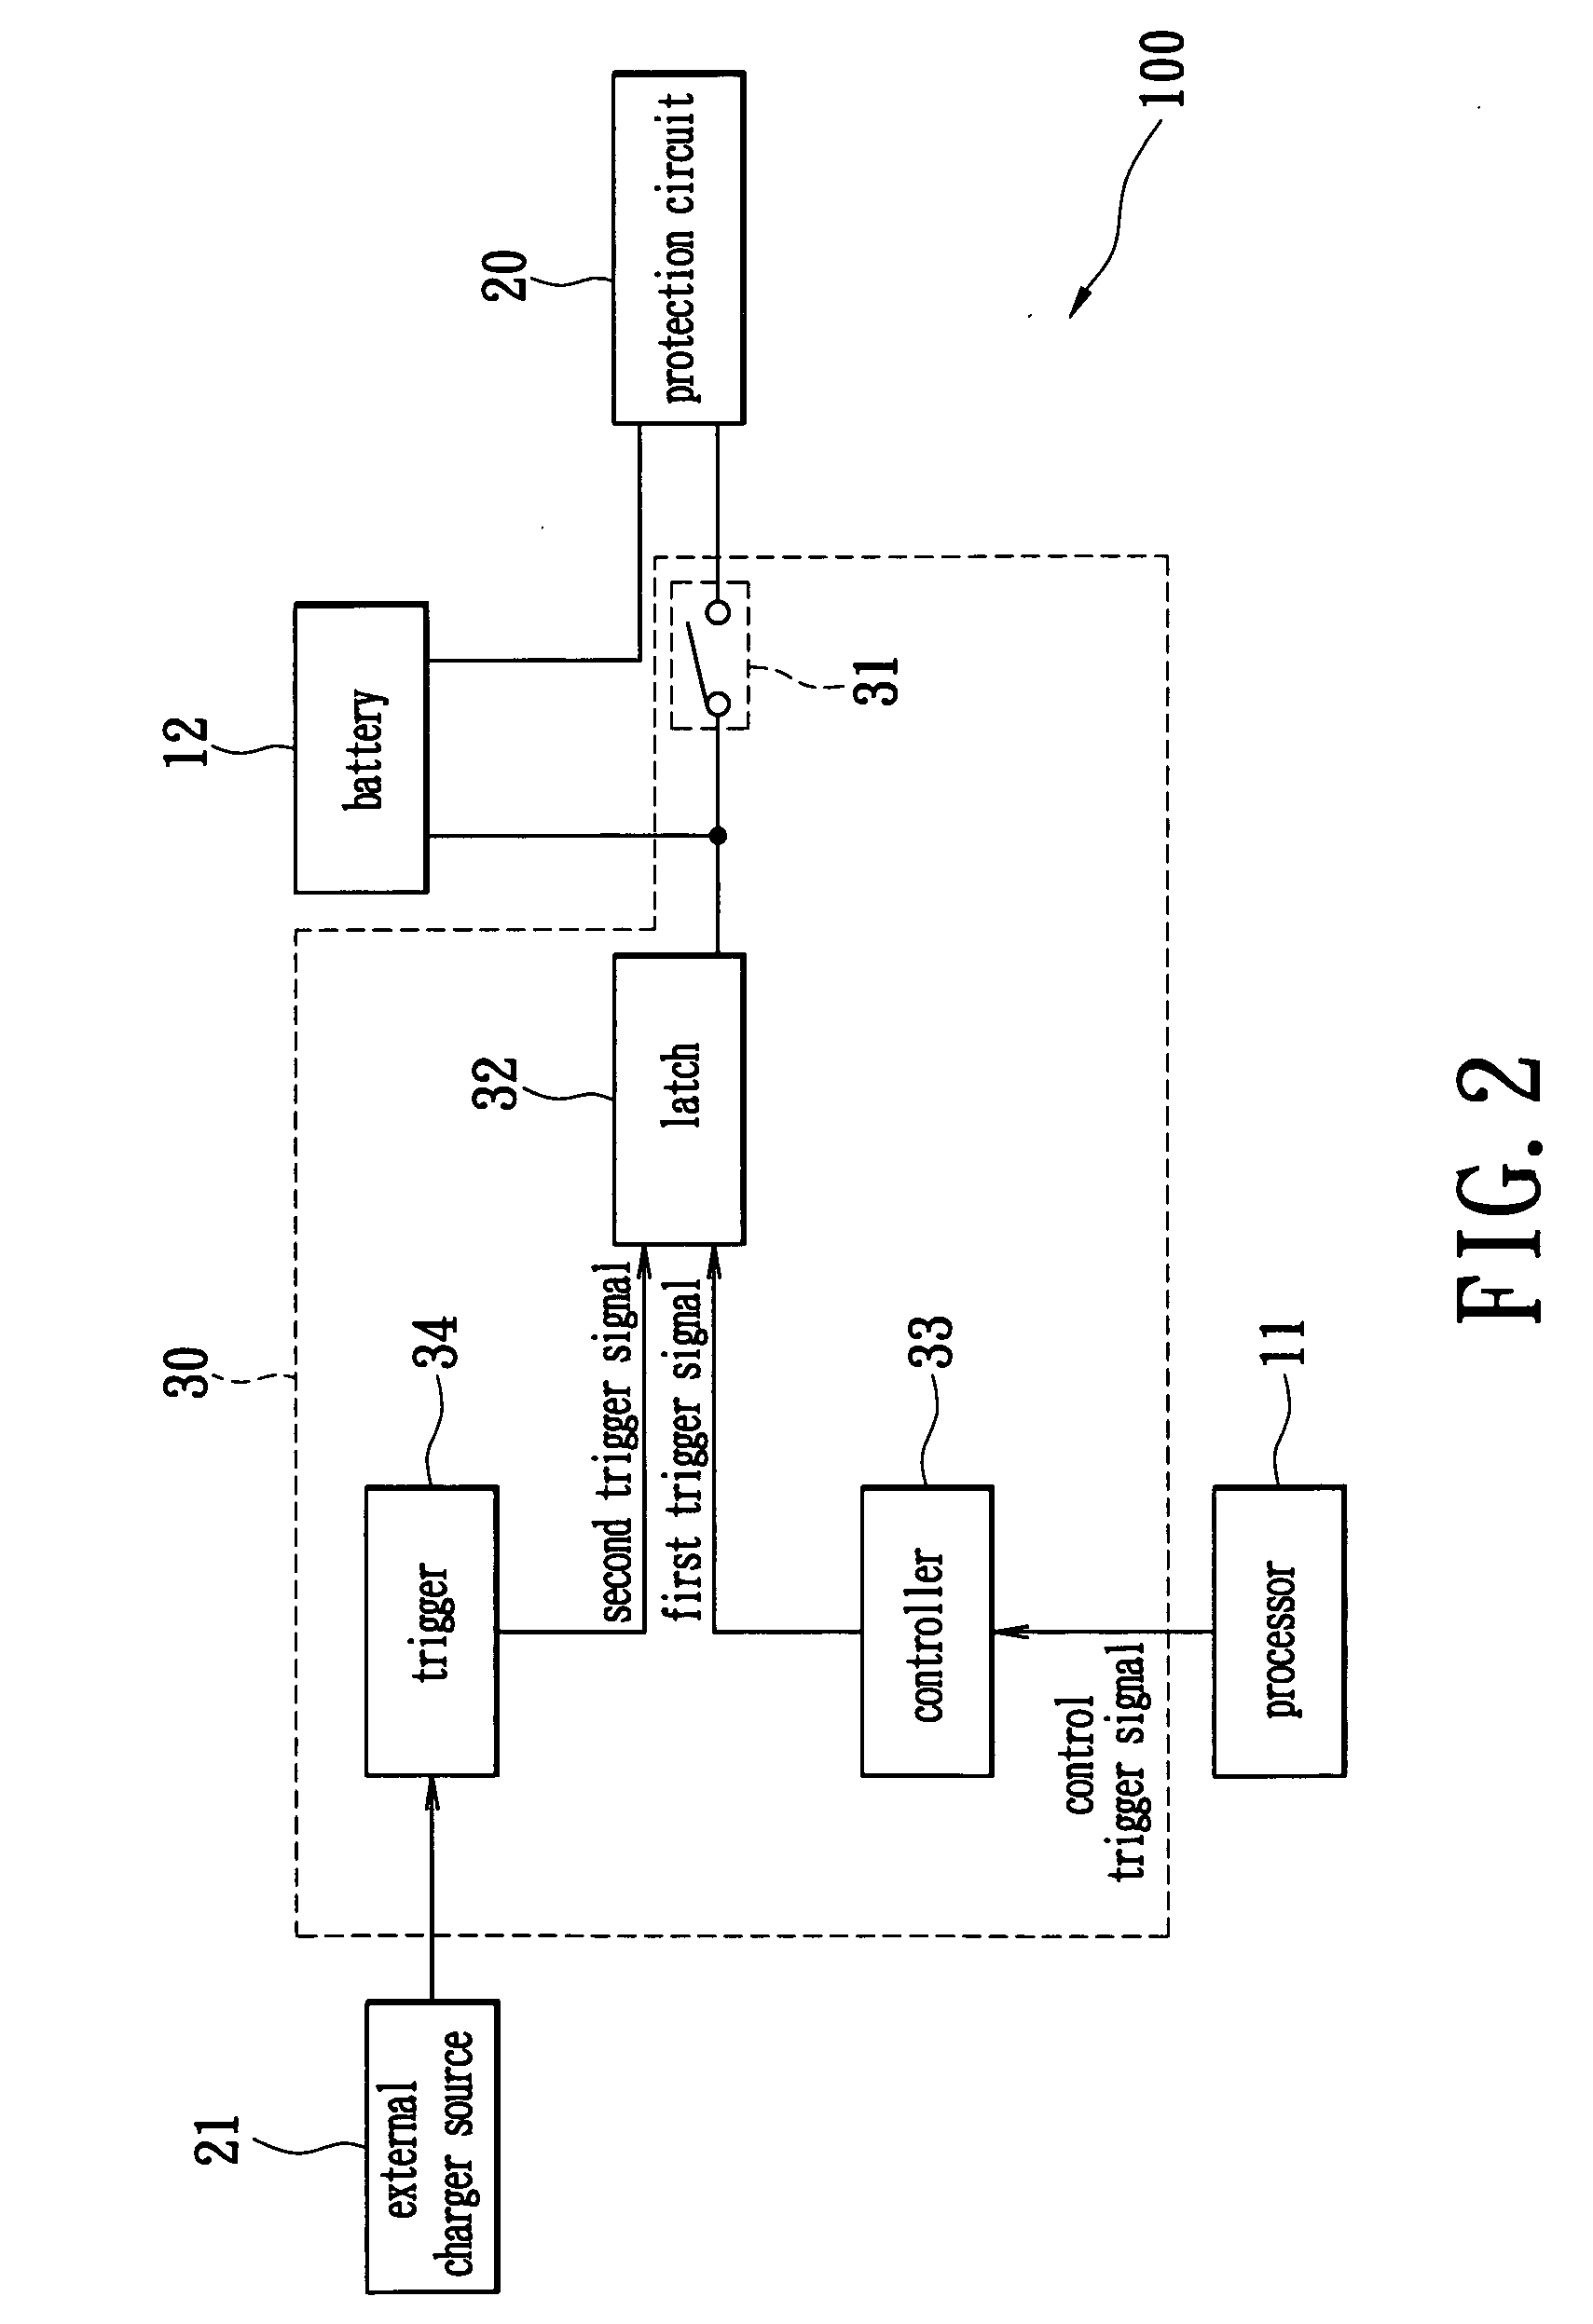 Controlling circuit for long-time battery retention